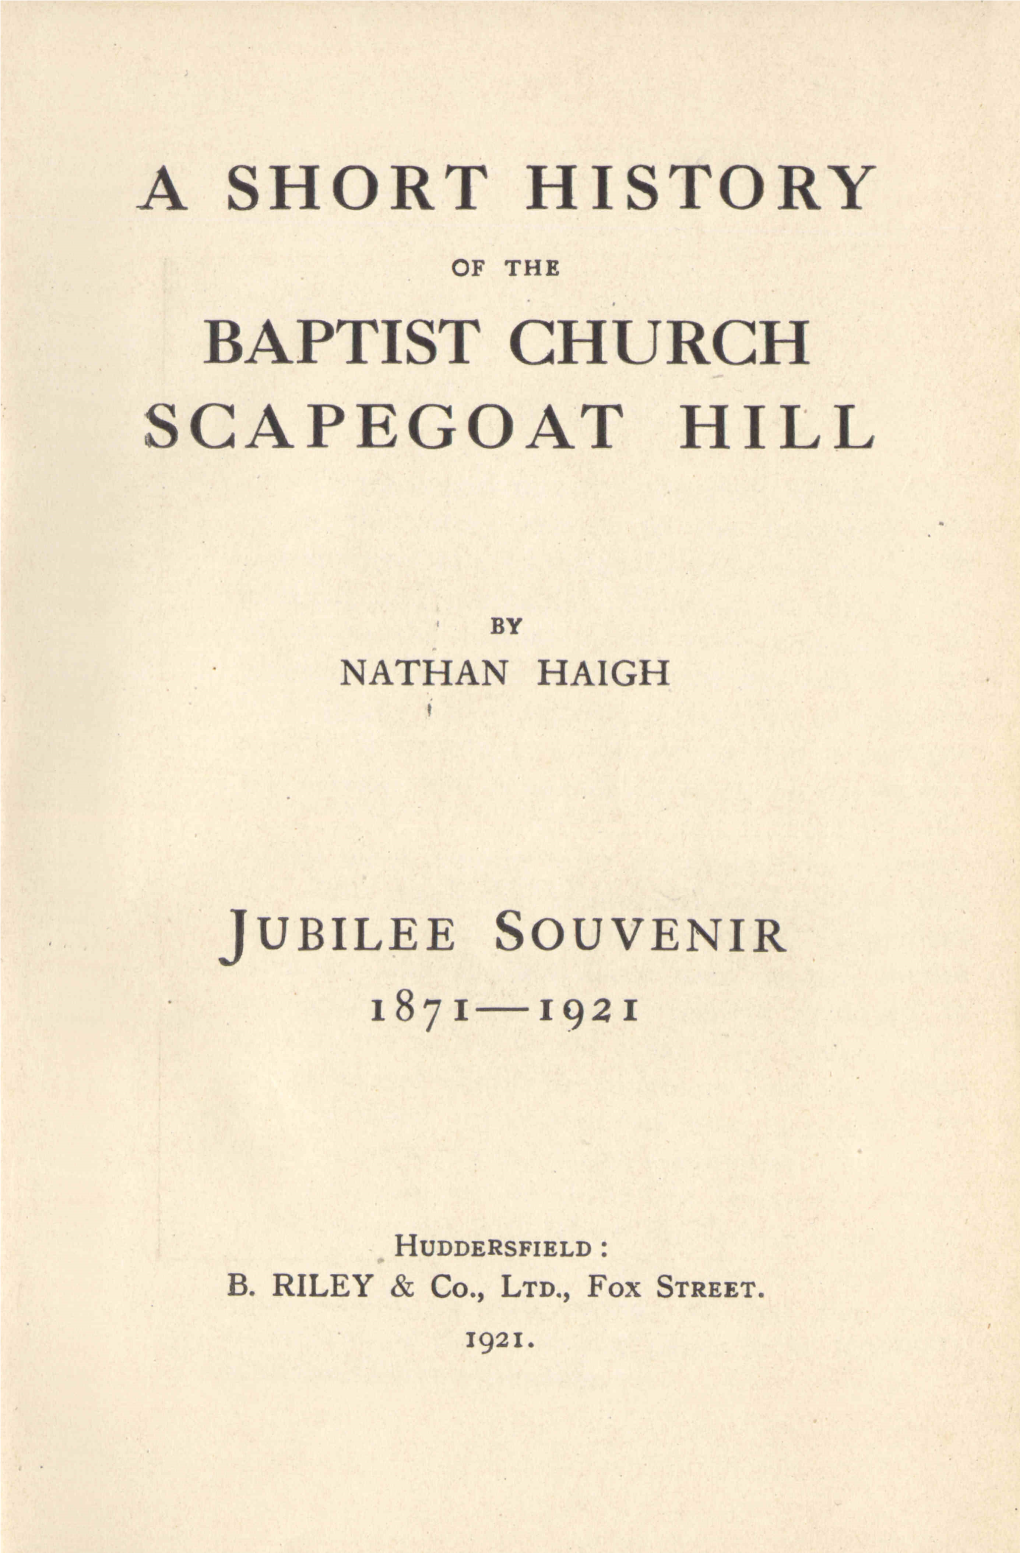 A Short History of the Baptist Church, Scapegoat Hill (1921)